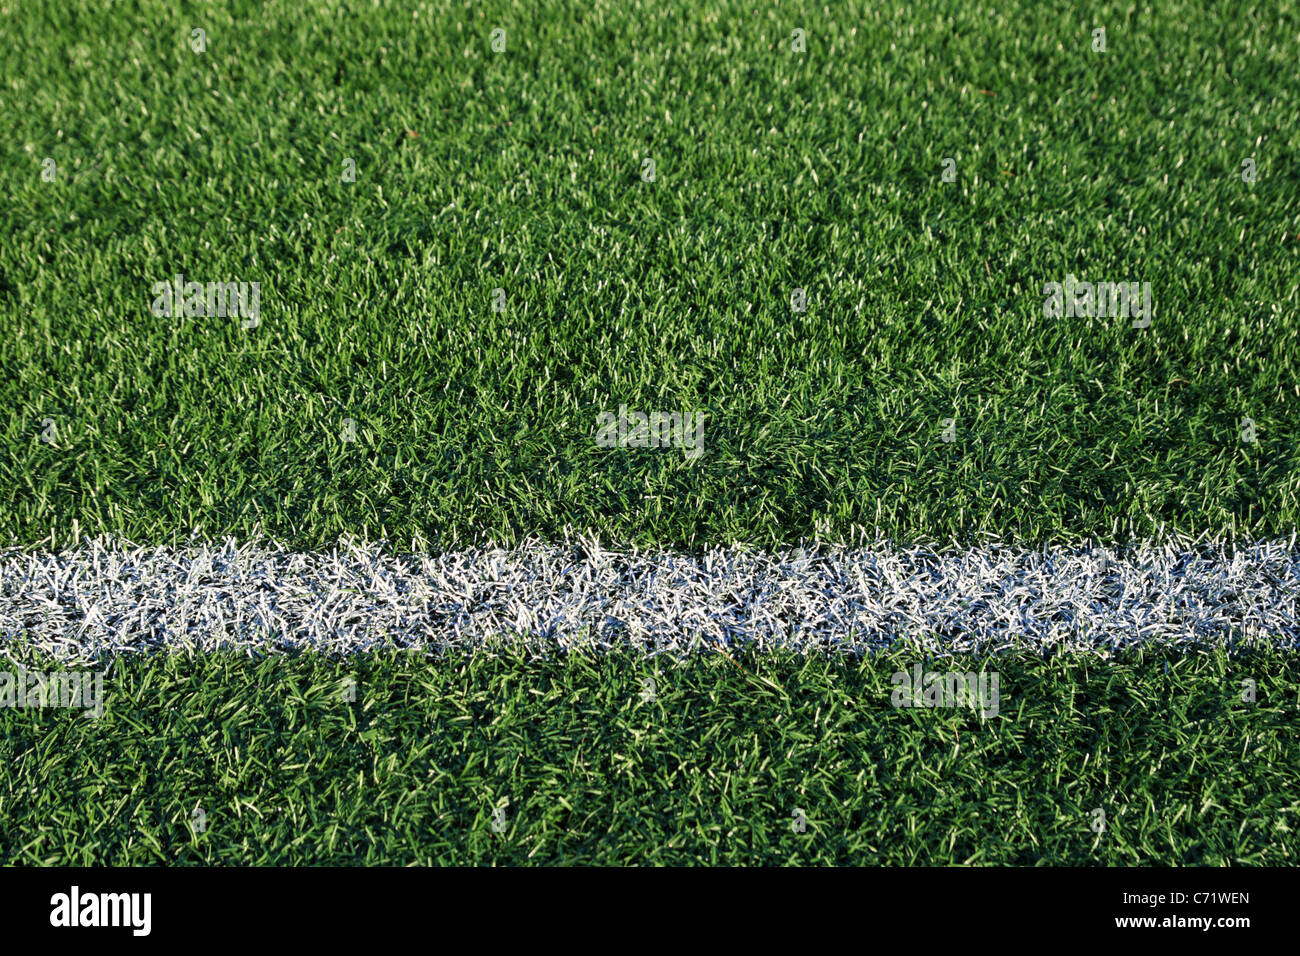 boundary line on an artificial turf athletic field Stock Photo